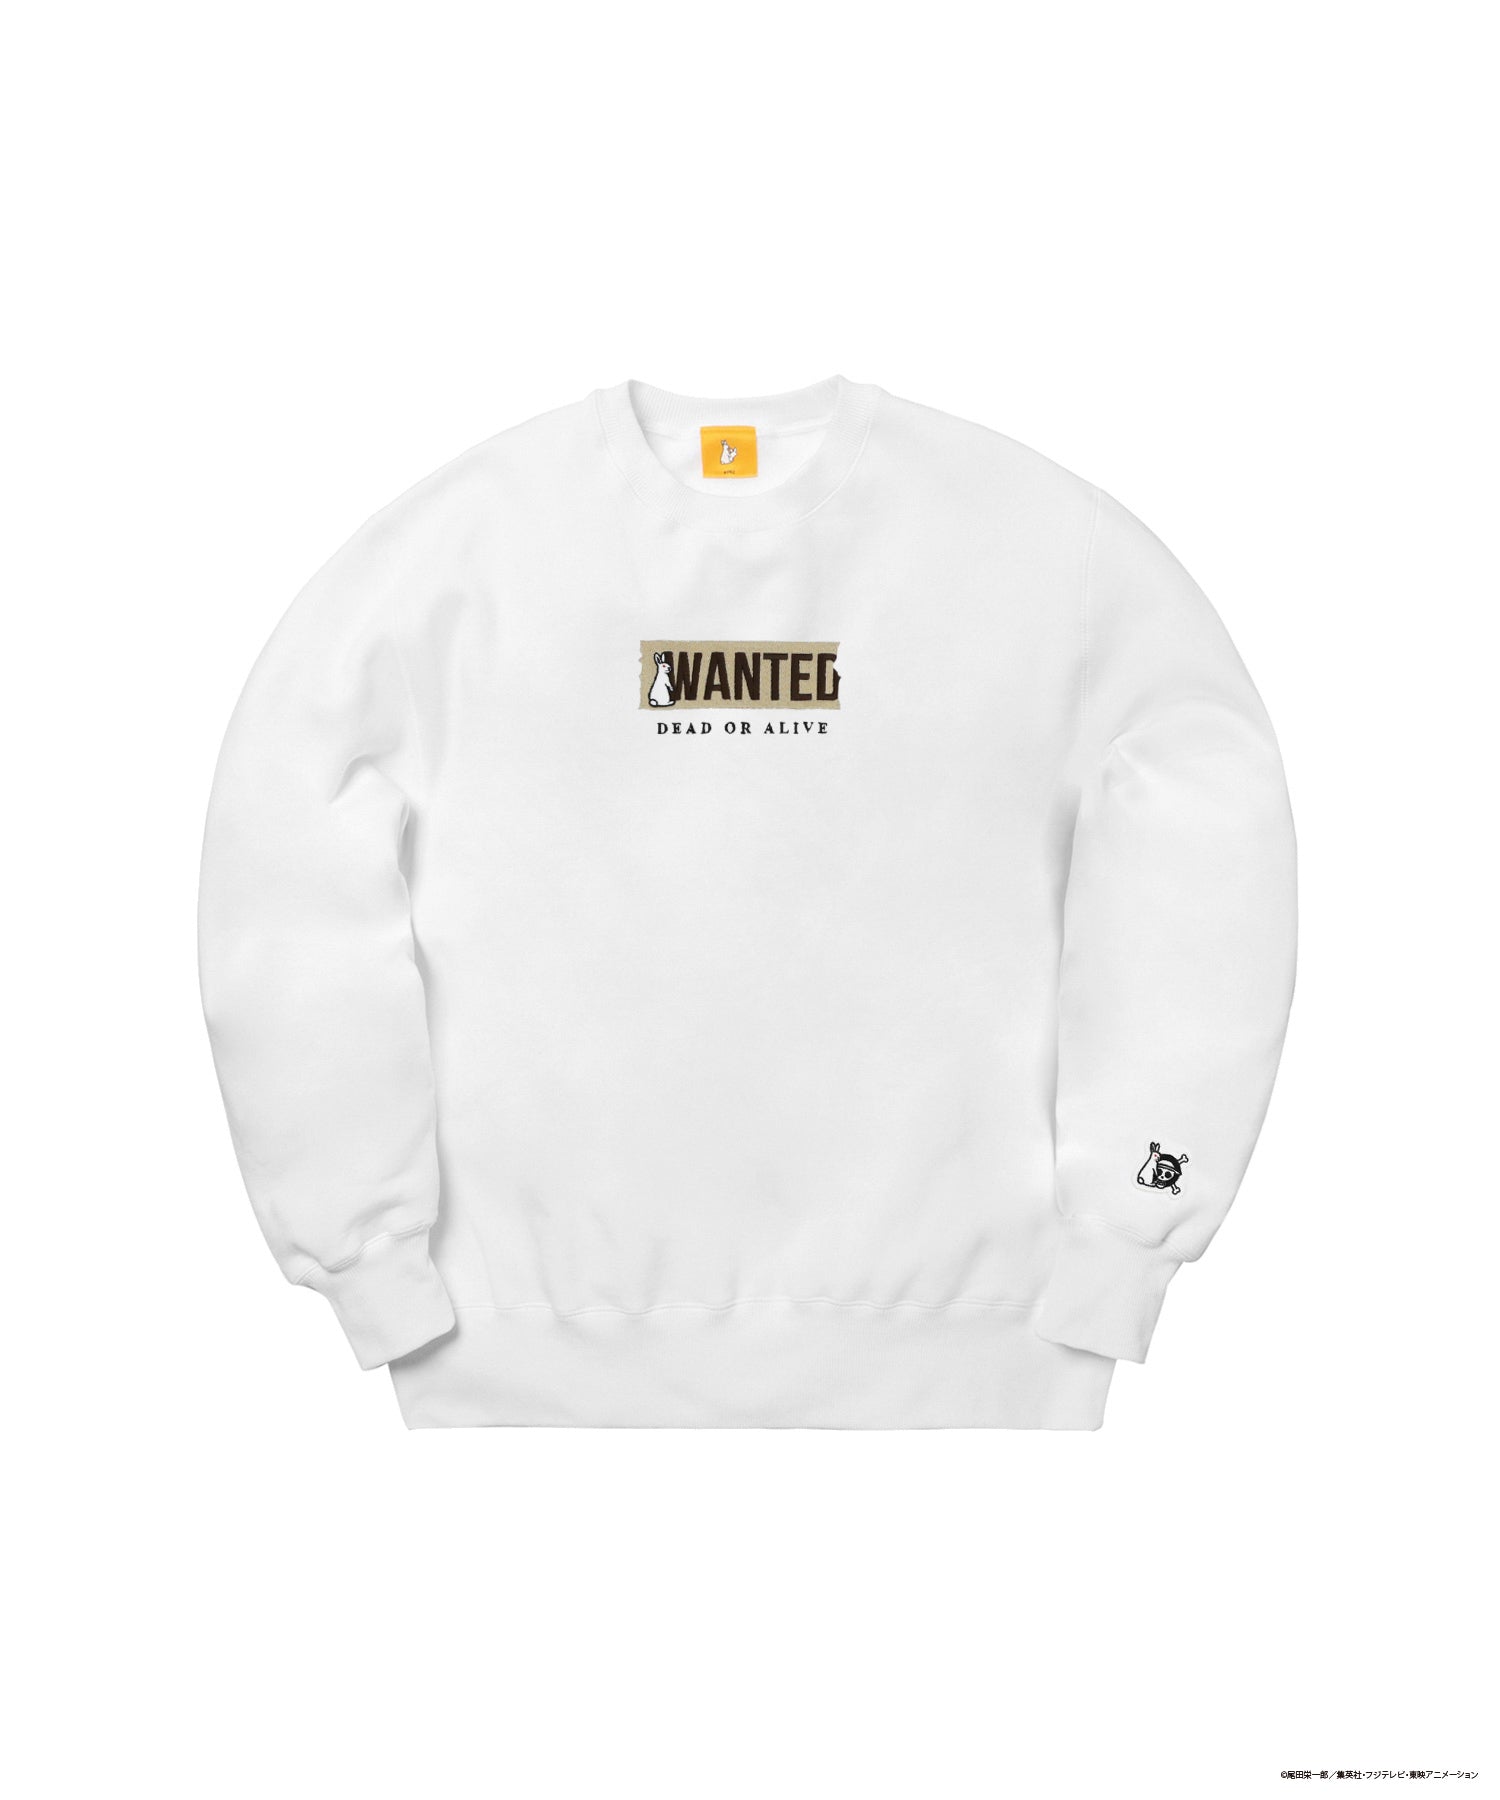 ONE PIECE collaboration with #FR2 WANTED Embroidery Sweatshirt